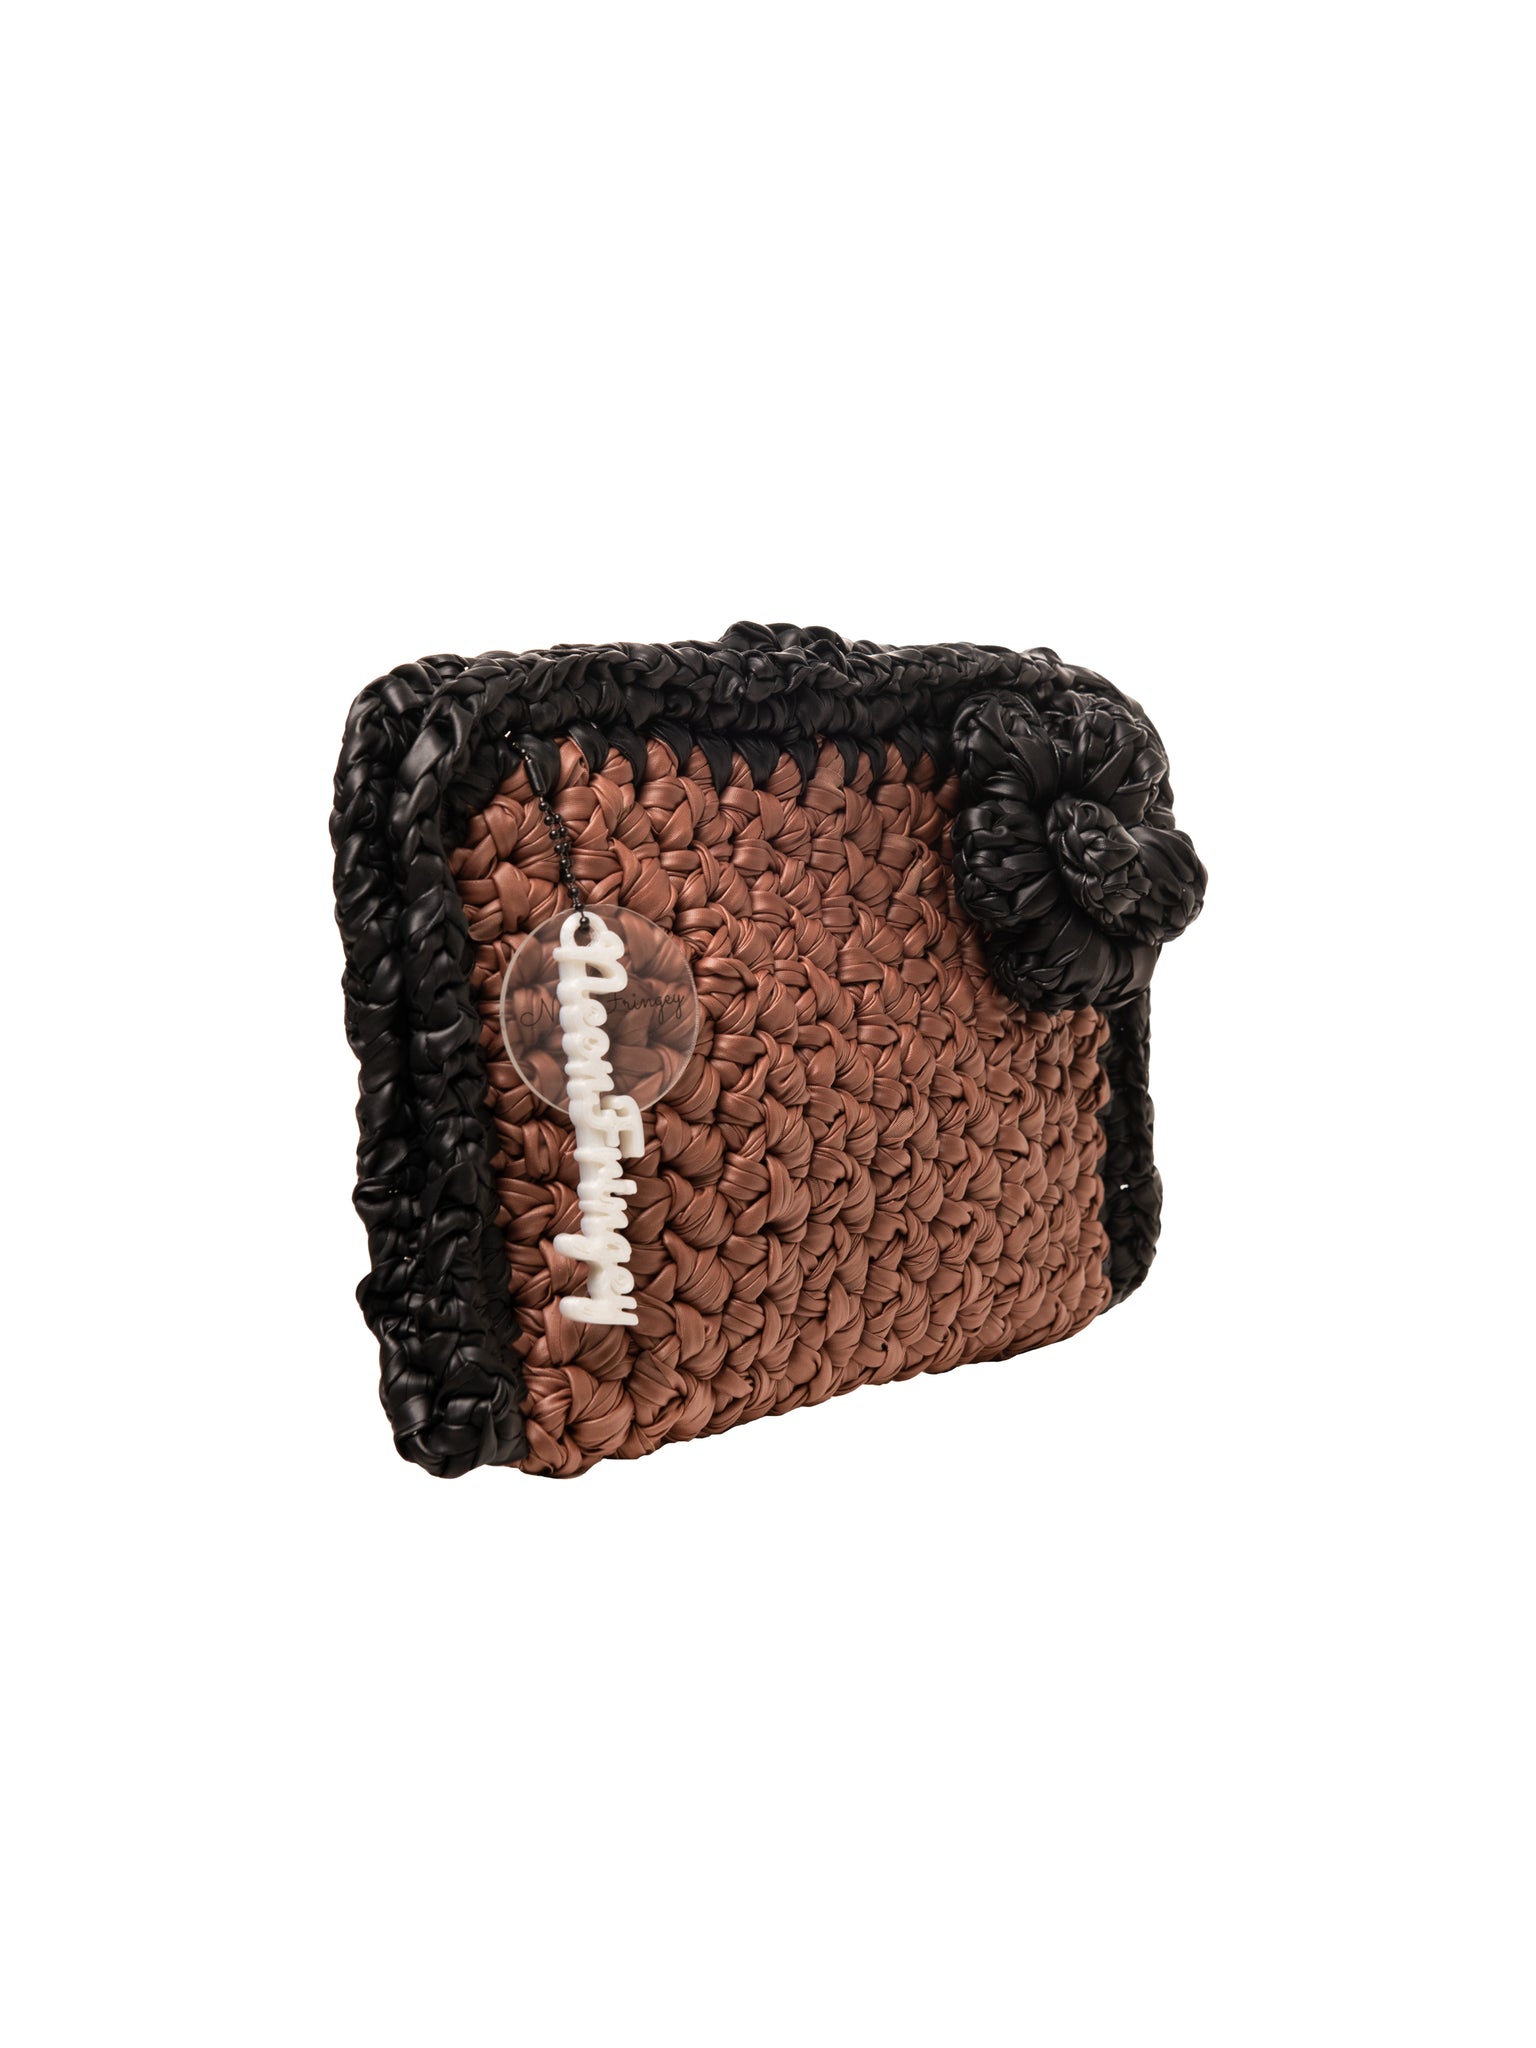 Brown and Black Ruffle Clutch